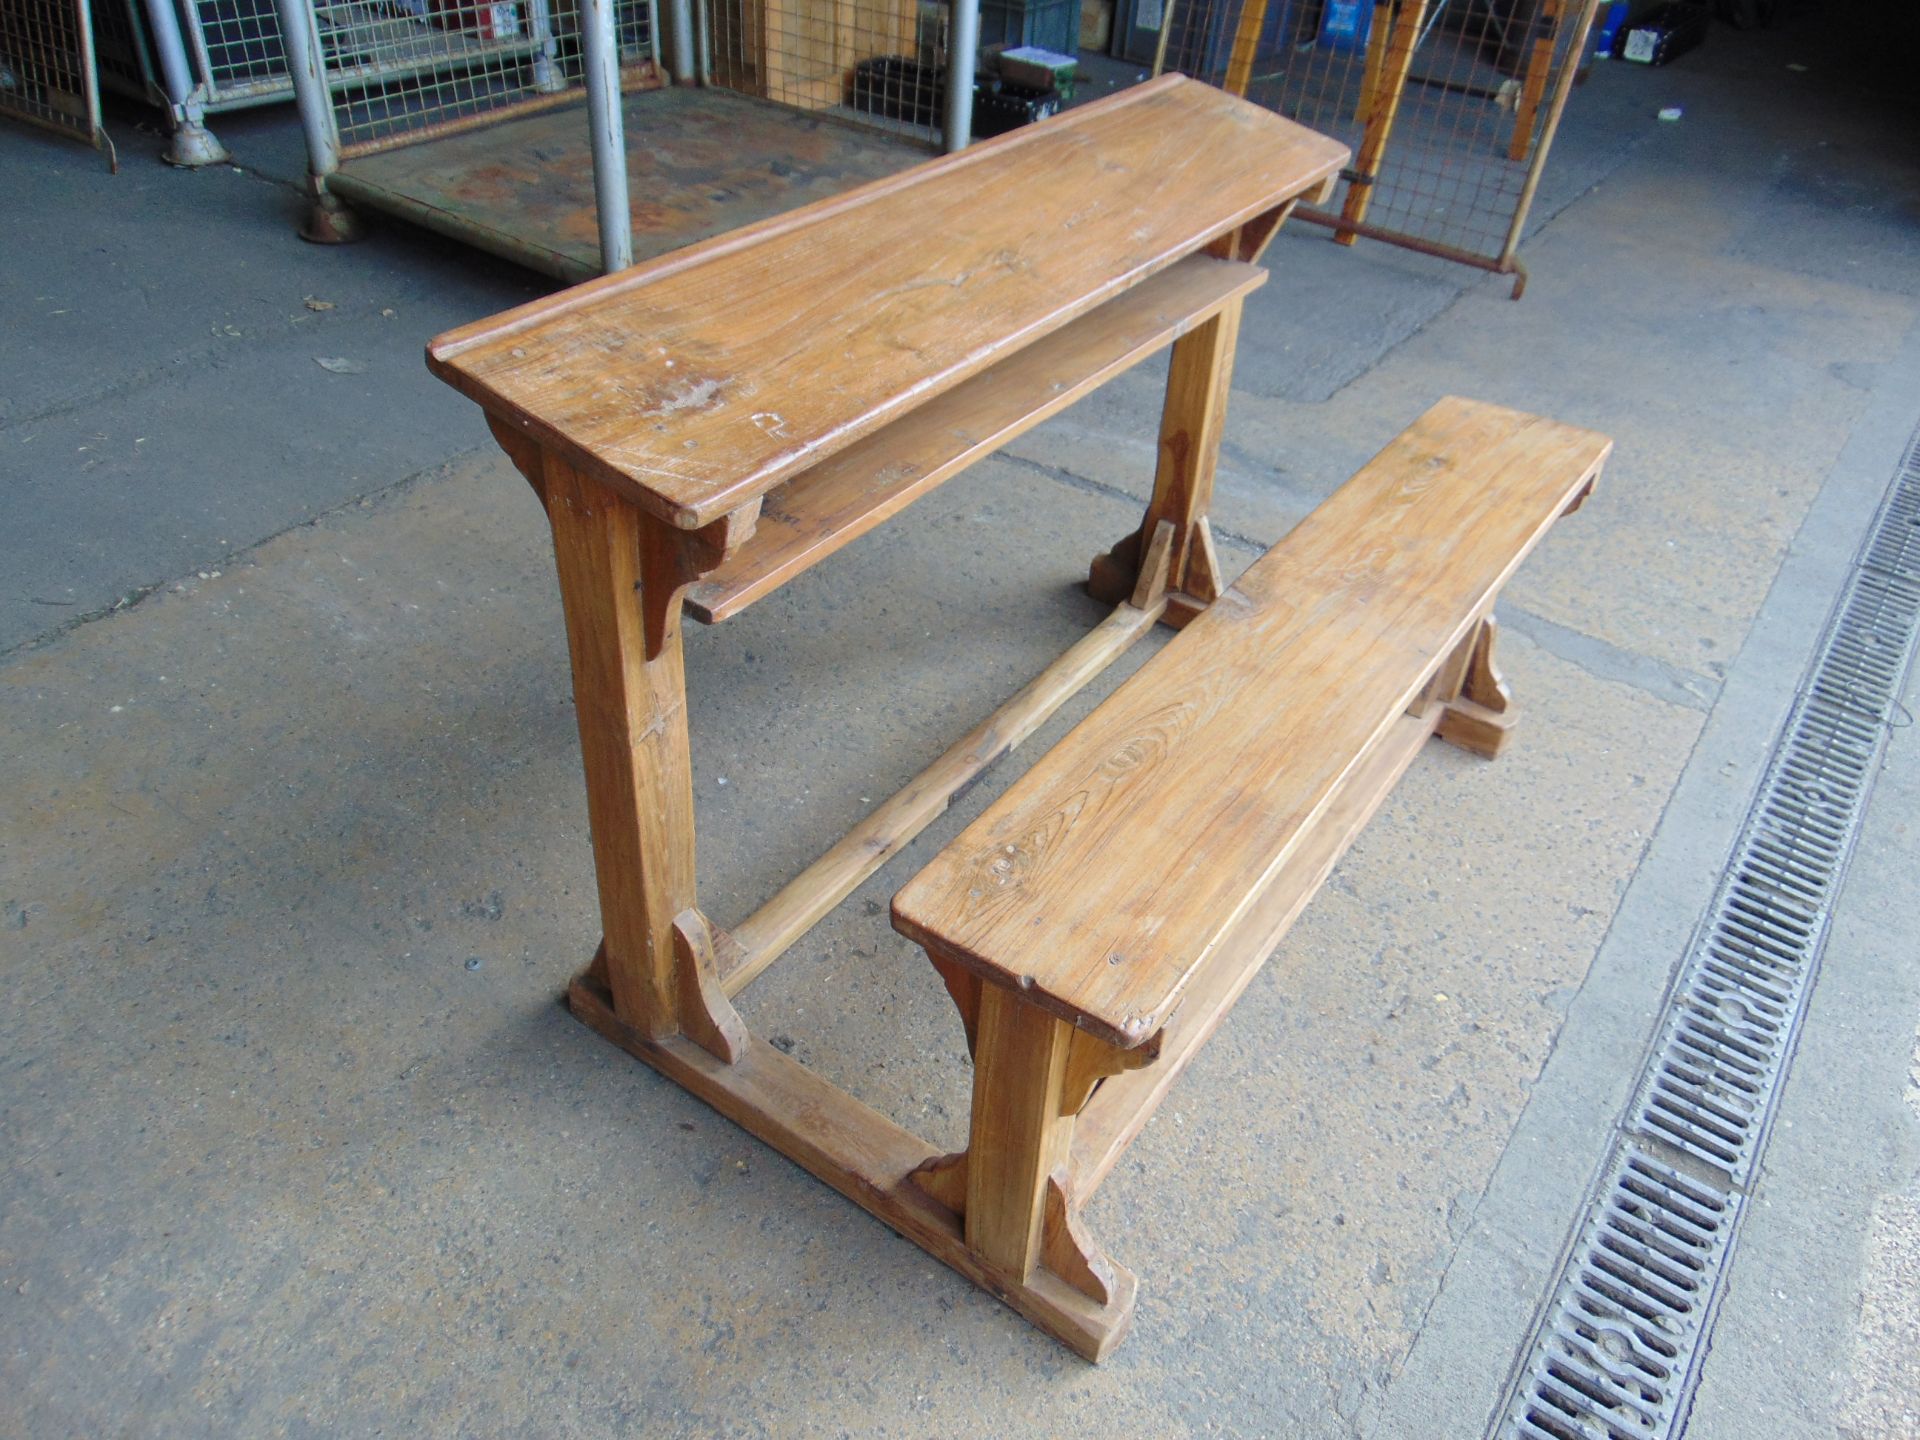 Antique Traditional Wooden School Bench Desk - Image 3 of 7